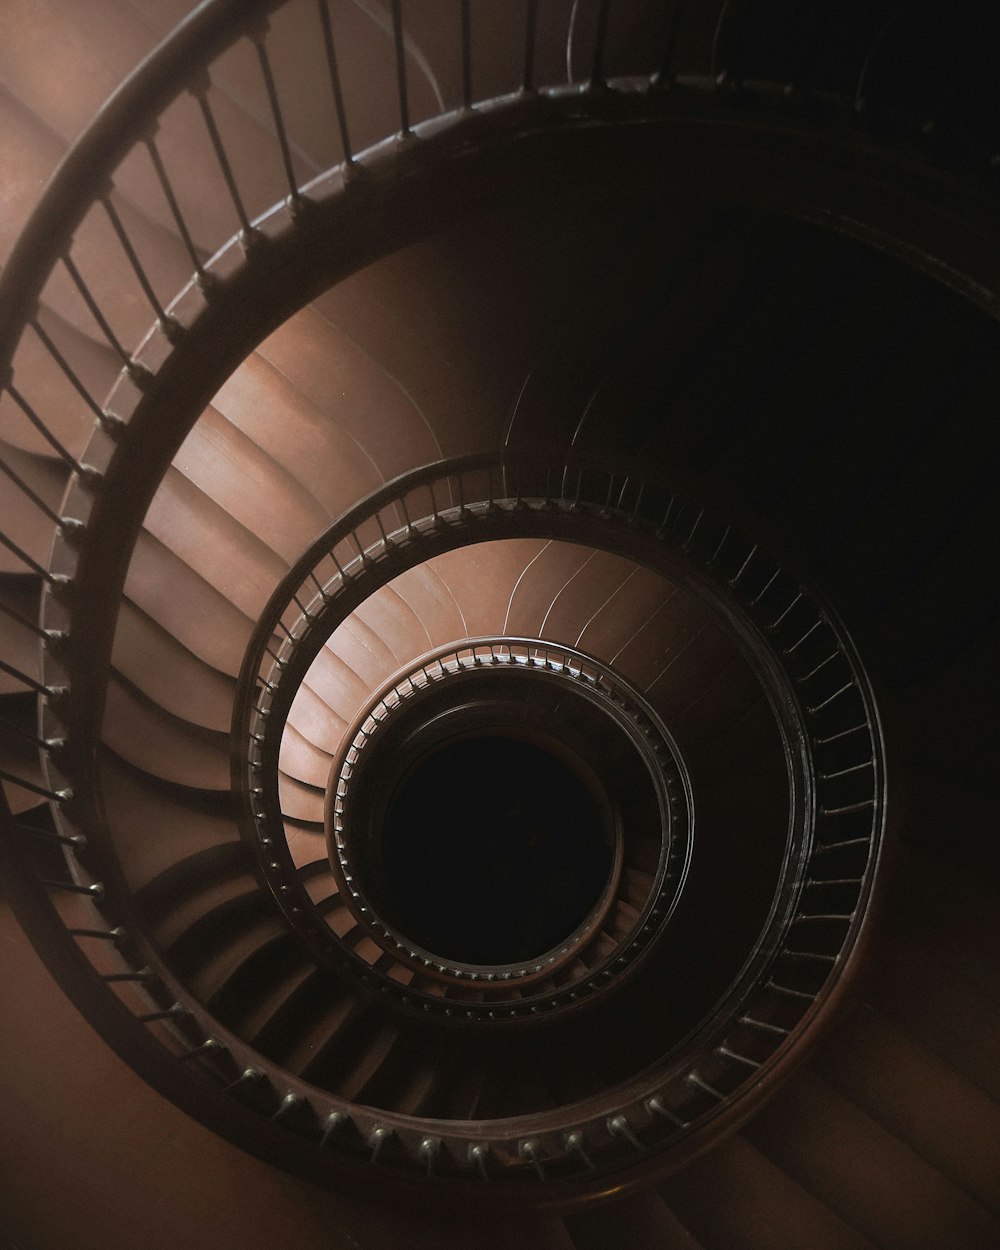 a spiral staircase in a building with a dark background